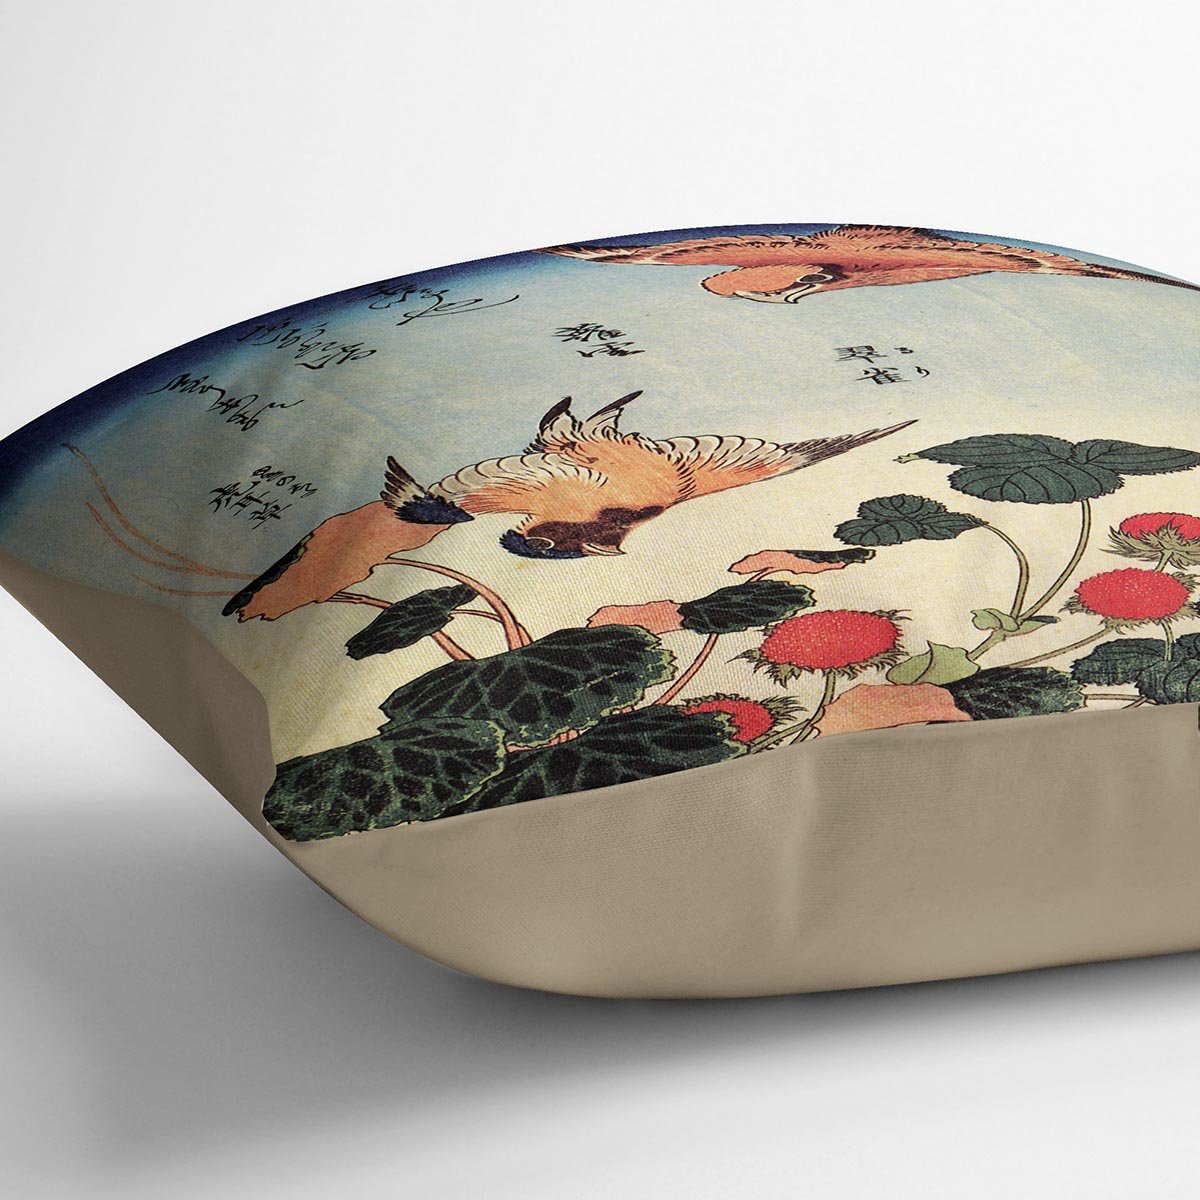 Wild strawberries and birds by Hokusai Throw Pillow